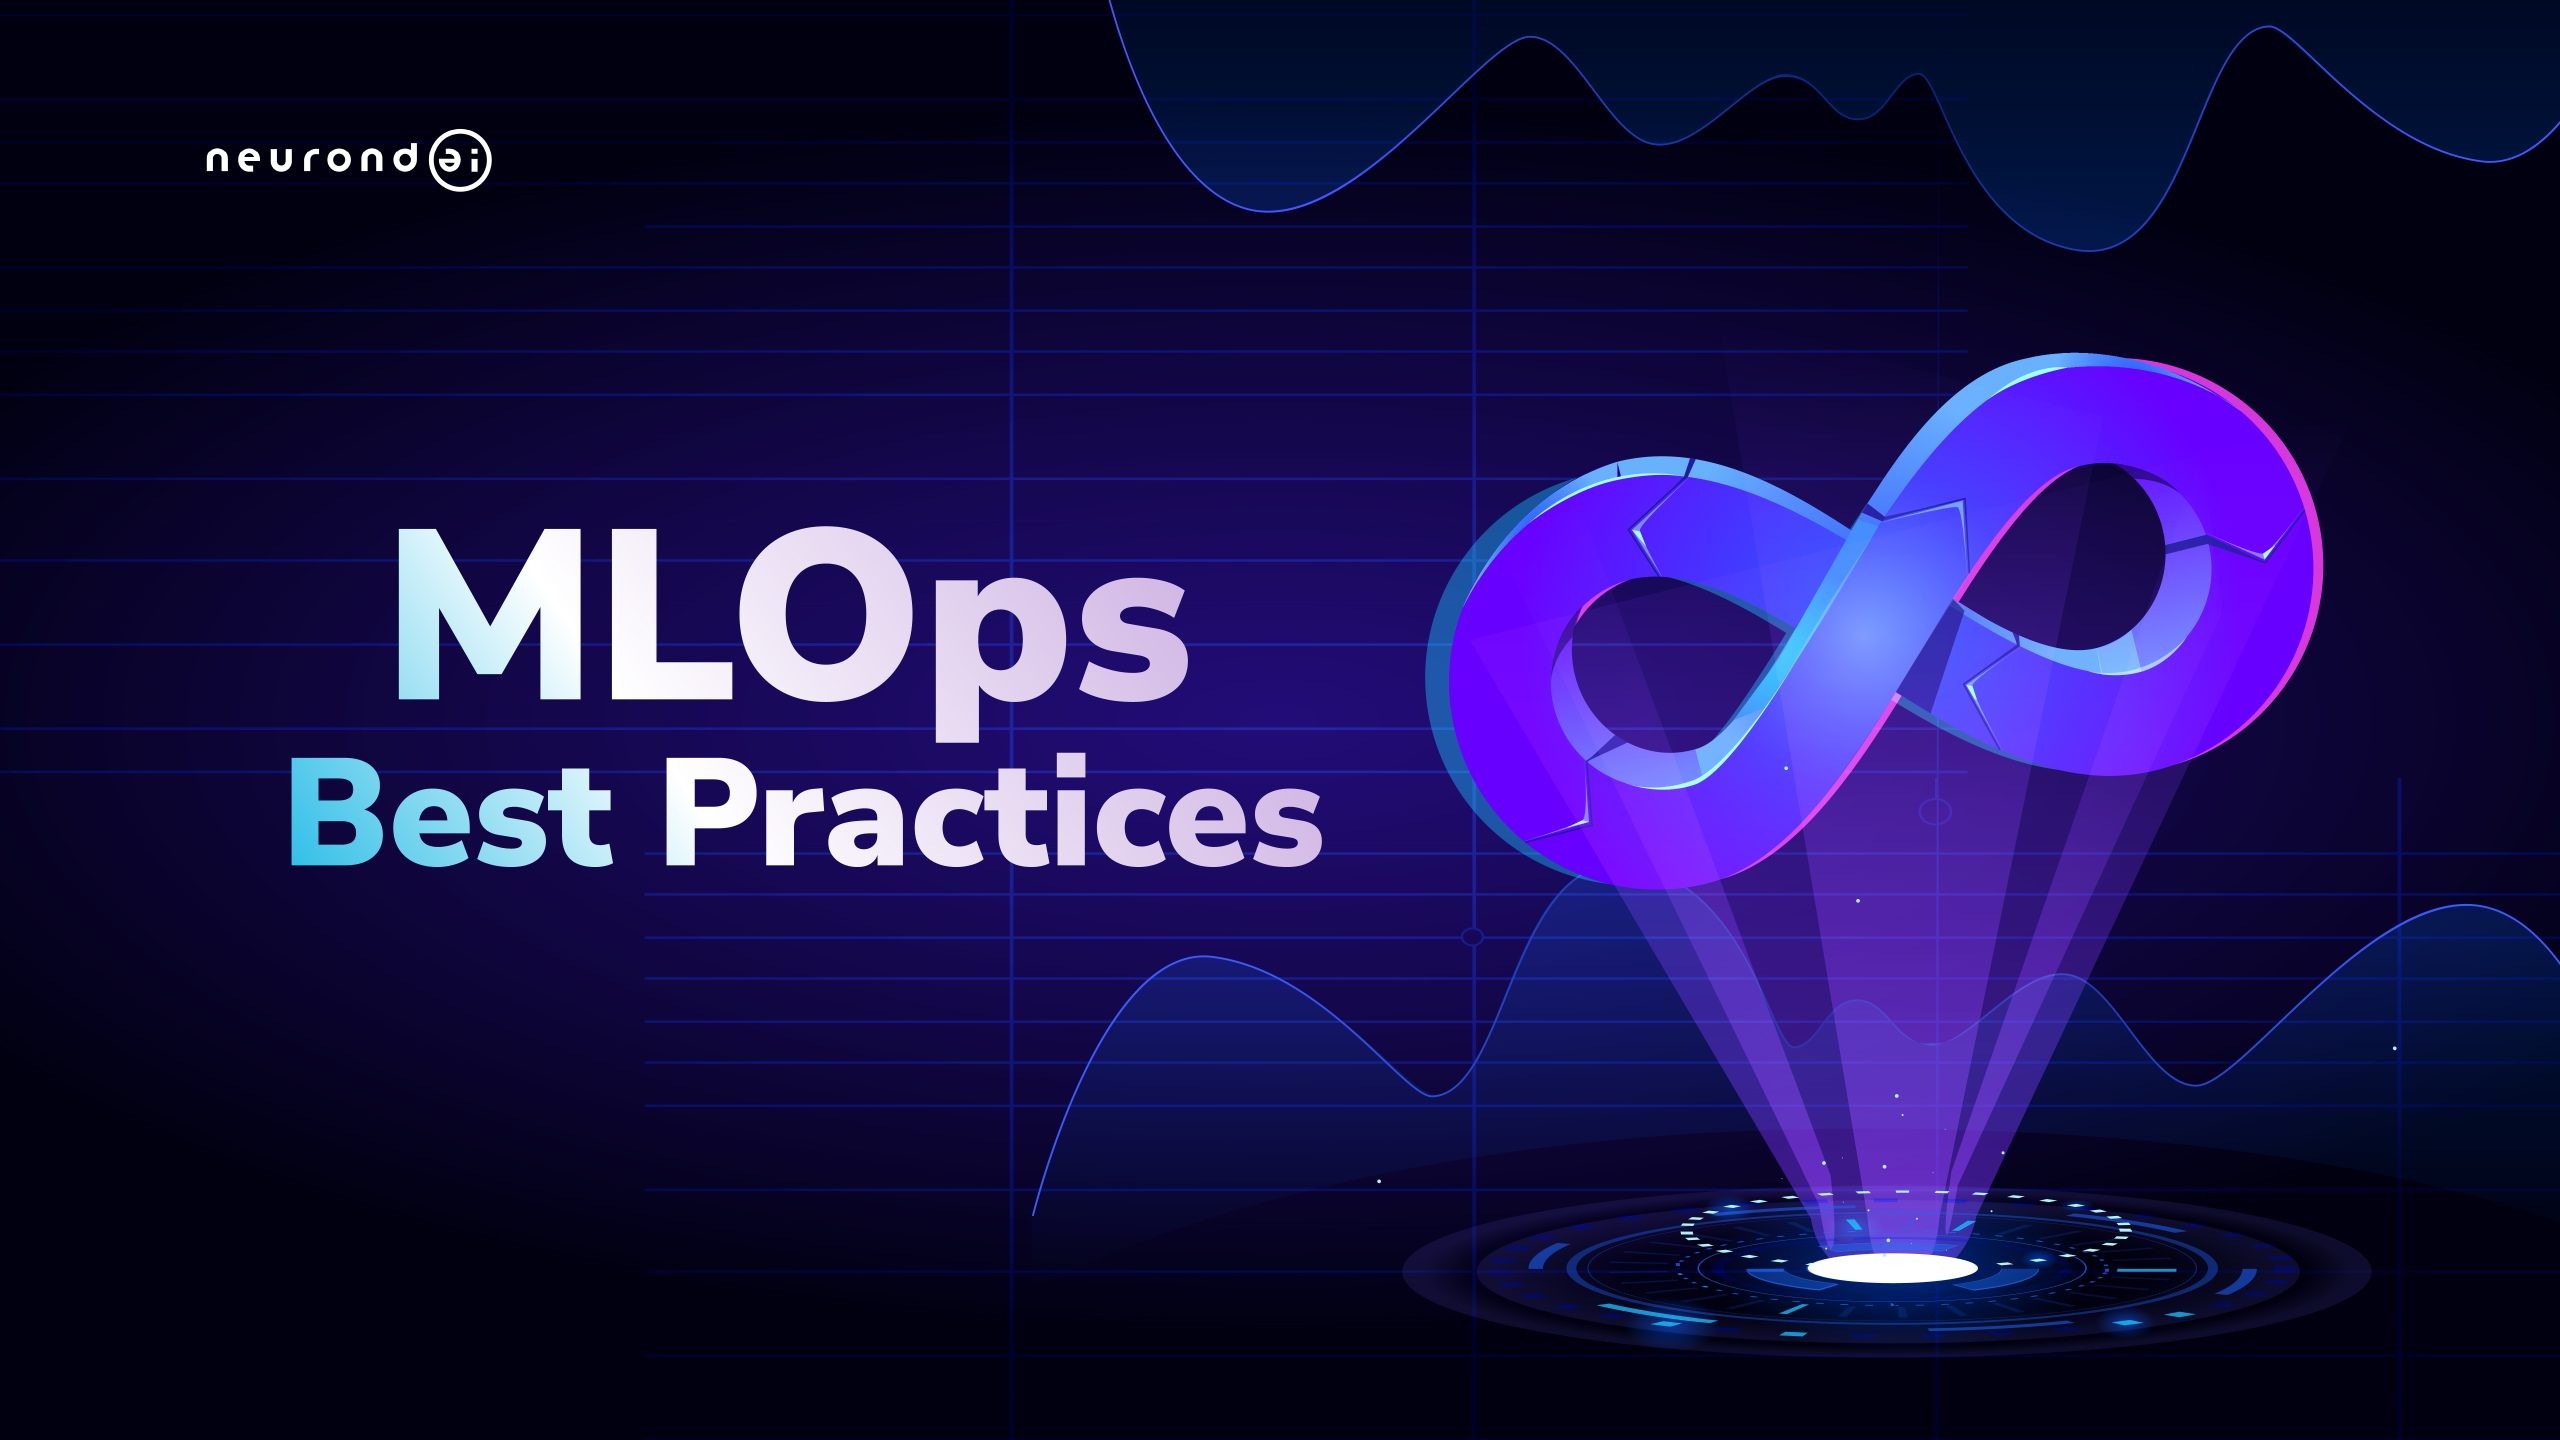 9 MLOps Best Practices and How to Apply Them